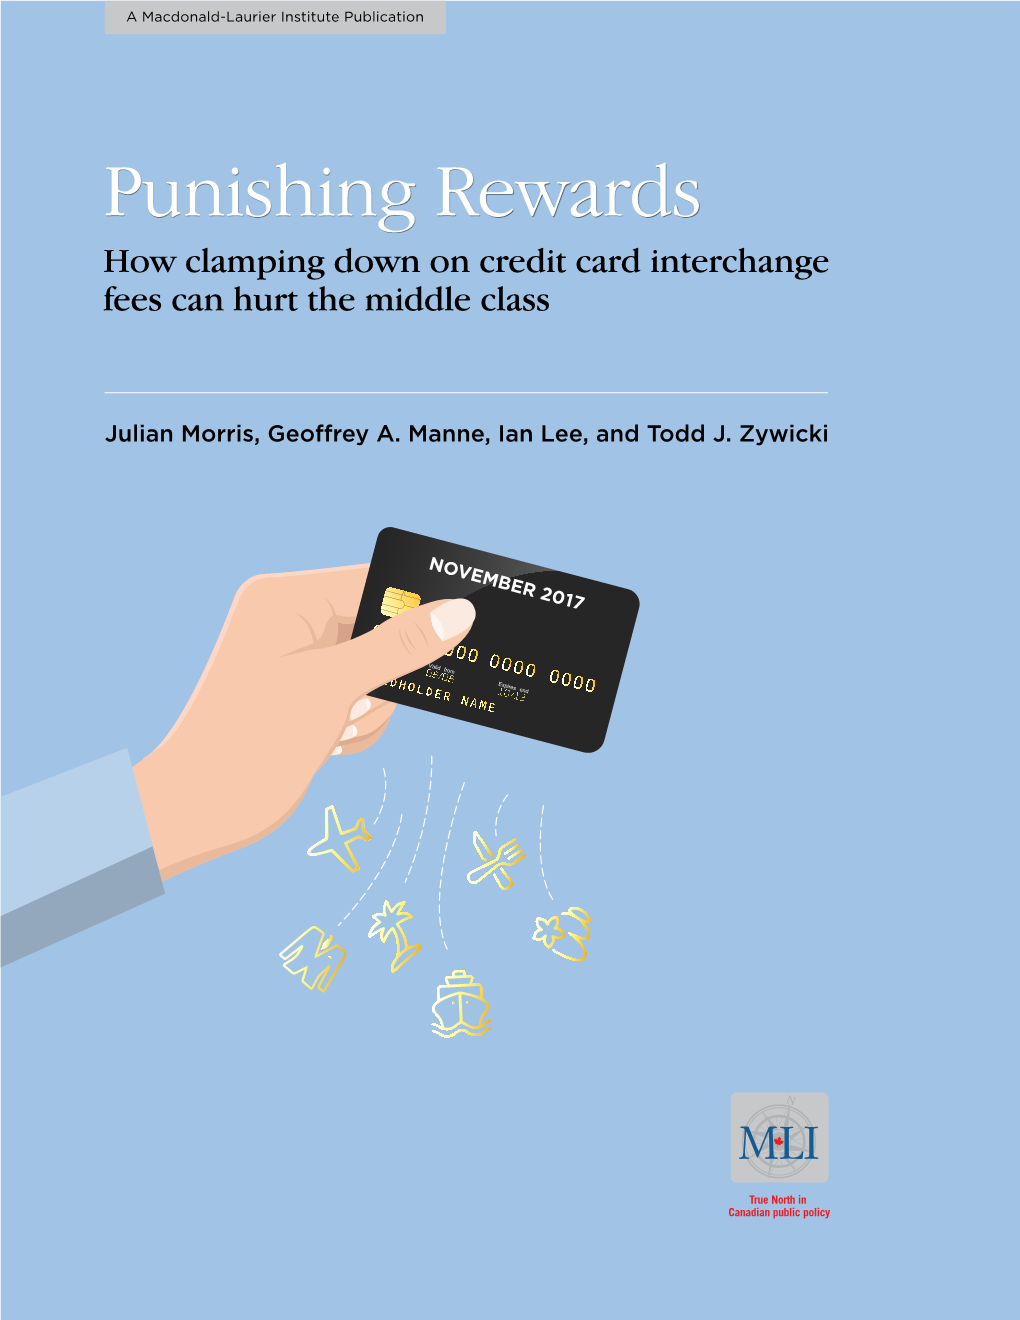 Punishing Rewards How Clamping Down on Credit Card Interchange Fees Can Hurt the Middle Class